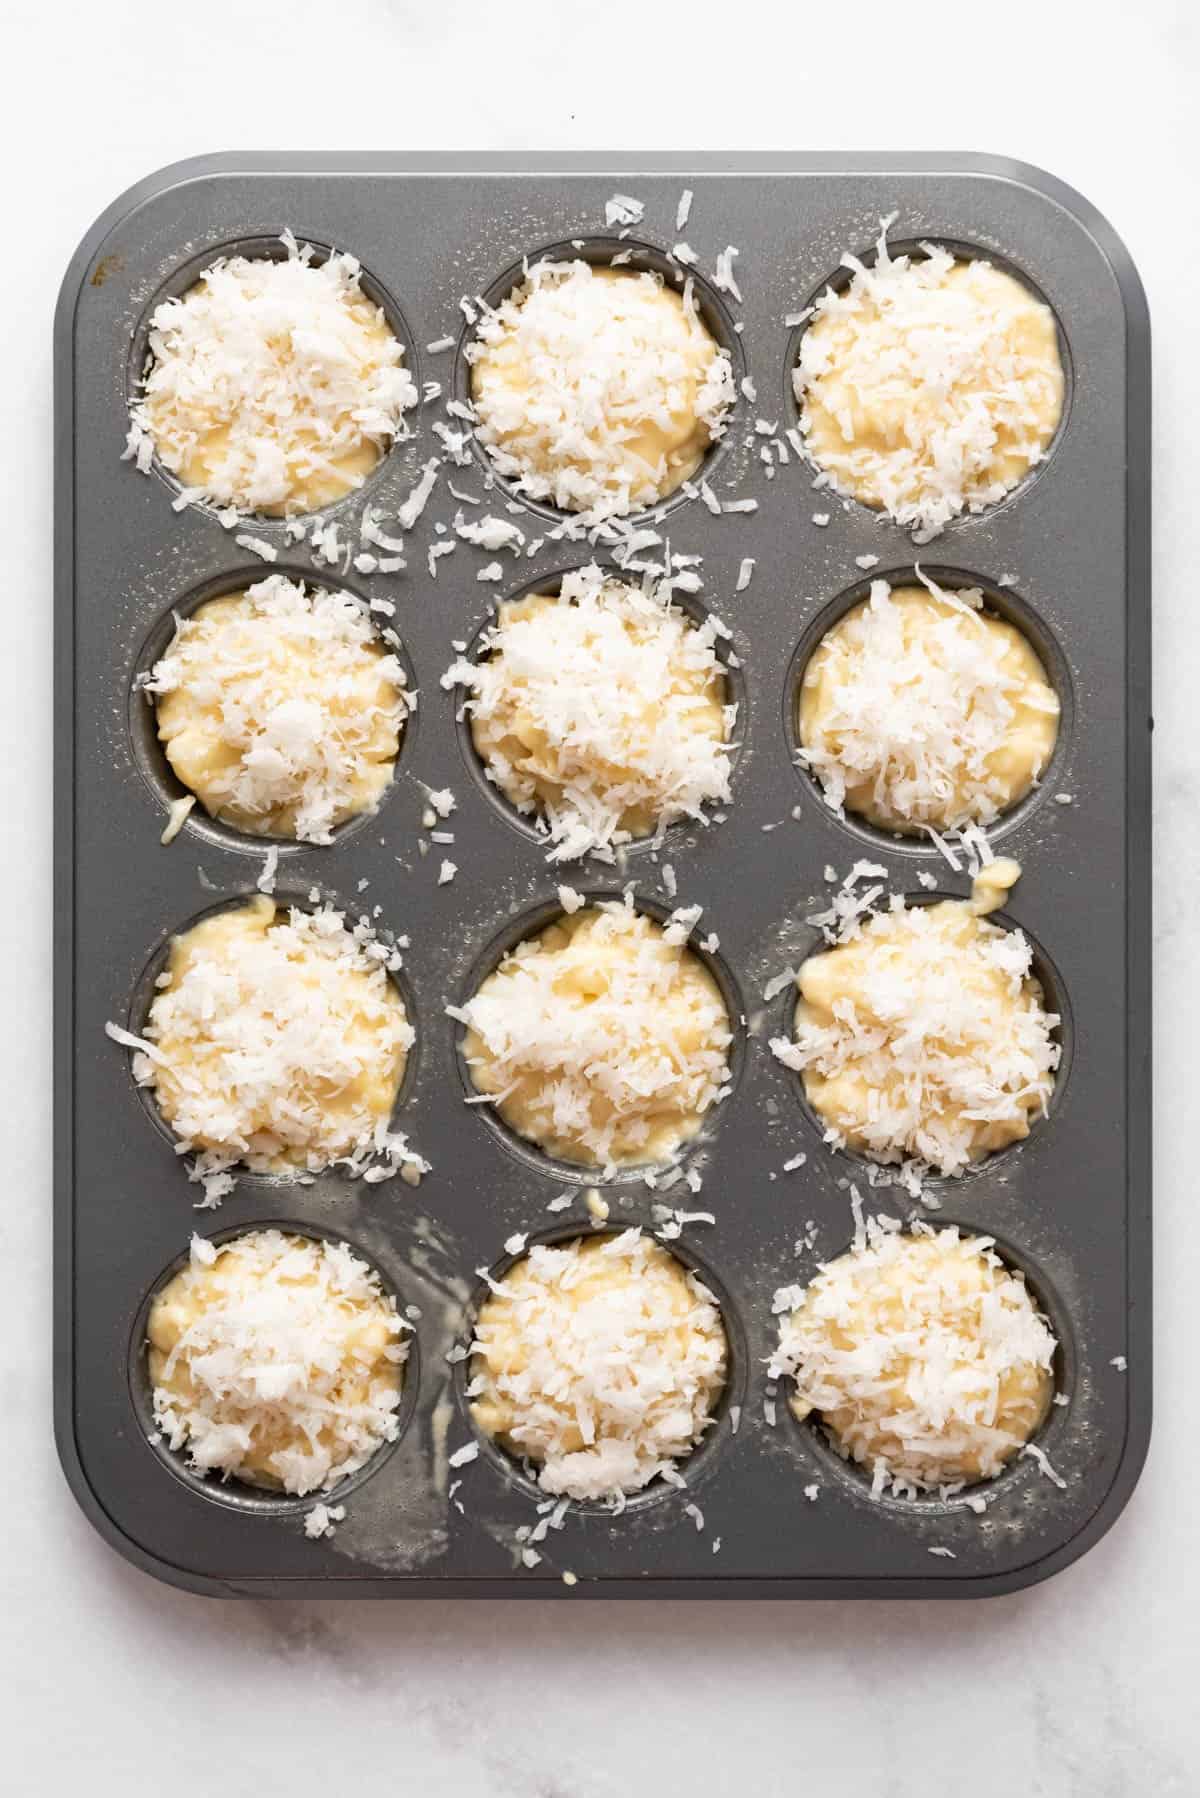 Unbaked pineapple muffin batter in a muffin pan with coconut sprinkled on top.